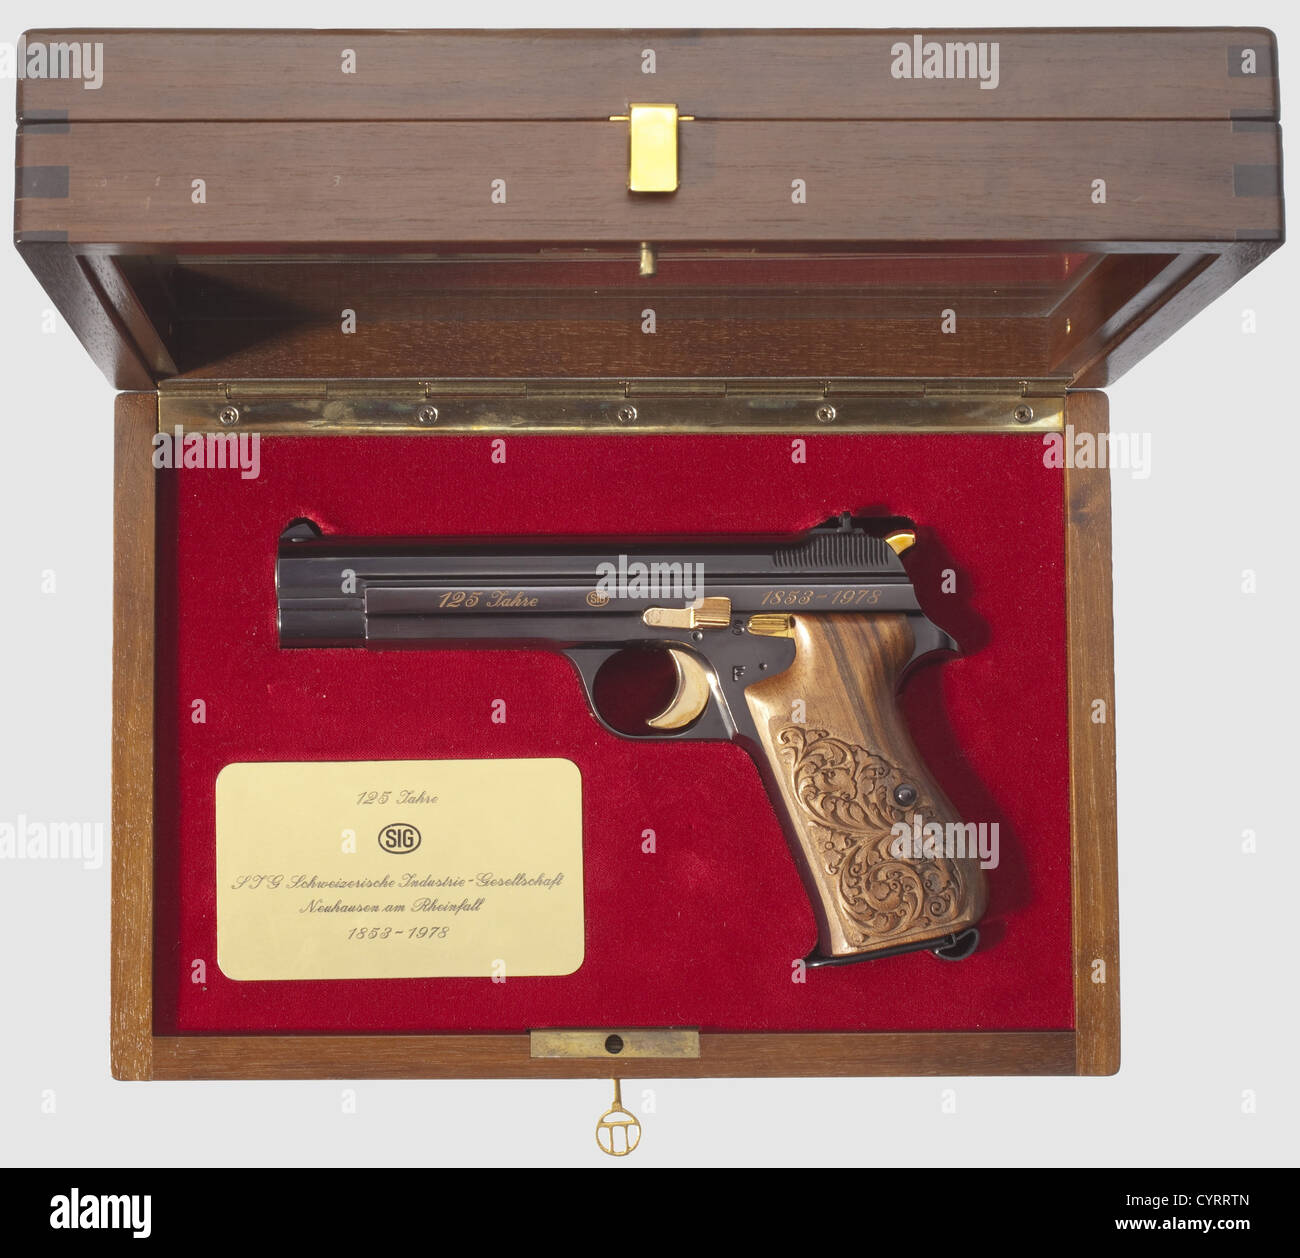 Commemorative pistol JP 210,1978,in its case,cal. 9 mm Parabellum,no. JP 054. Matching numbers. Bright bore. Eight shots. On left side of slide gold-inlaid engraving "125 Jahre - SIG - 1853 - 1978". Complete original highly polished finish,grip frame lightly plum-coloured. Trigger,locking lever,safety and hammer gilded. Carved walnut grip panels. Magazine. Comes in walnut case with window,dimensions 30 x 20 x 9 cm,lined with red velvet,commemorative badge fitted in case bottom. Case key. Rare collectorïs item in brand new condition from a limited edit,Additional-Rights-Clearences-Not Available Stock Photo